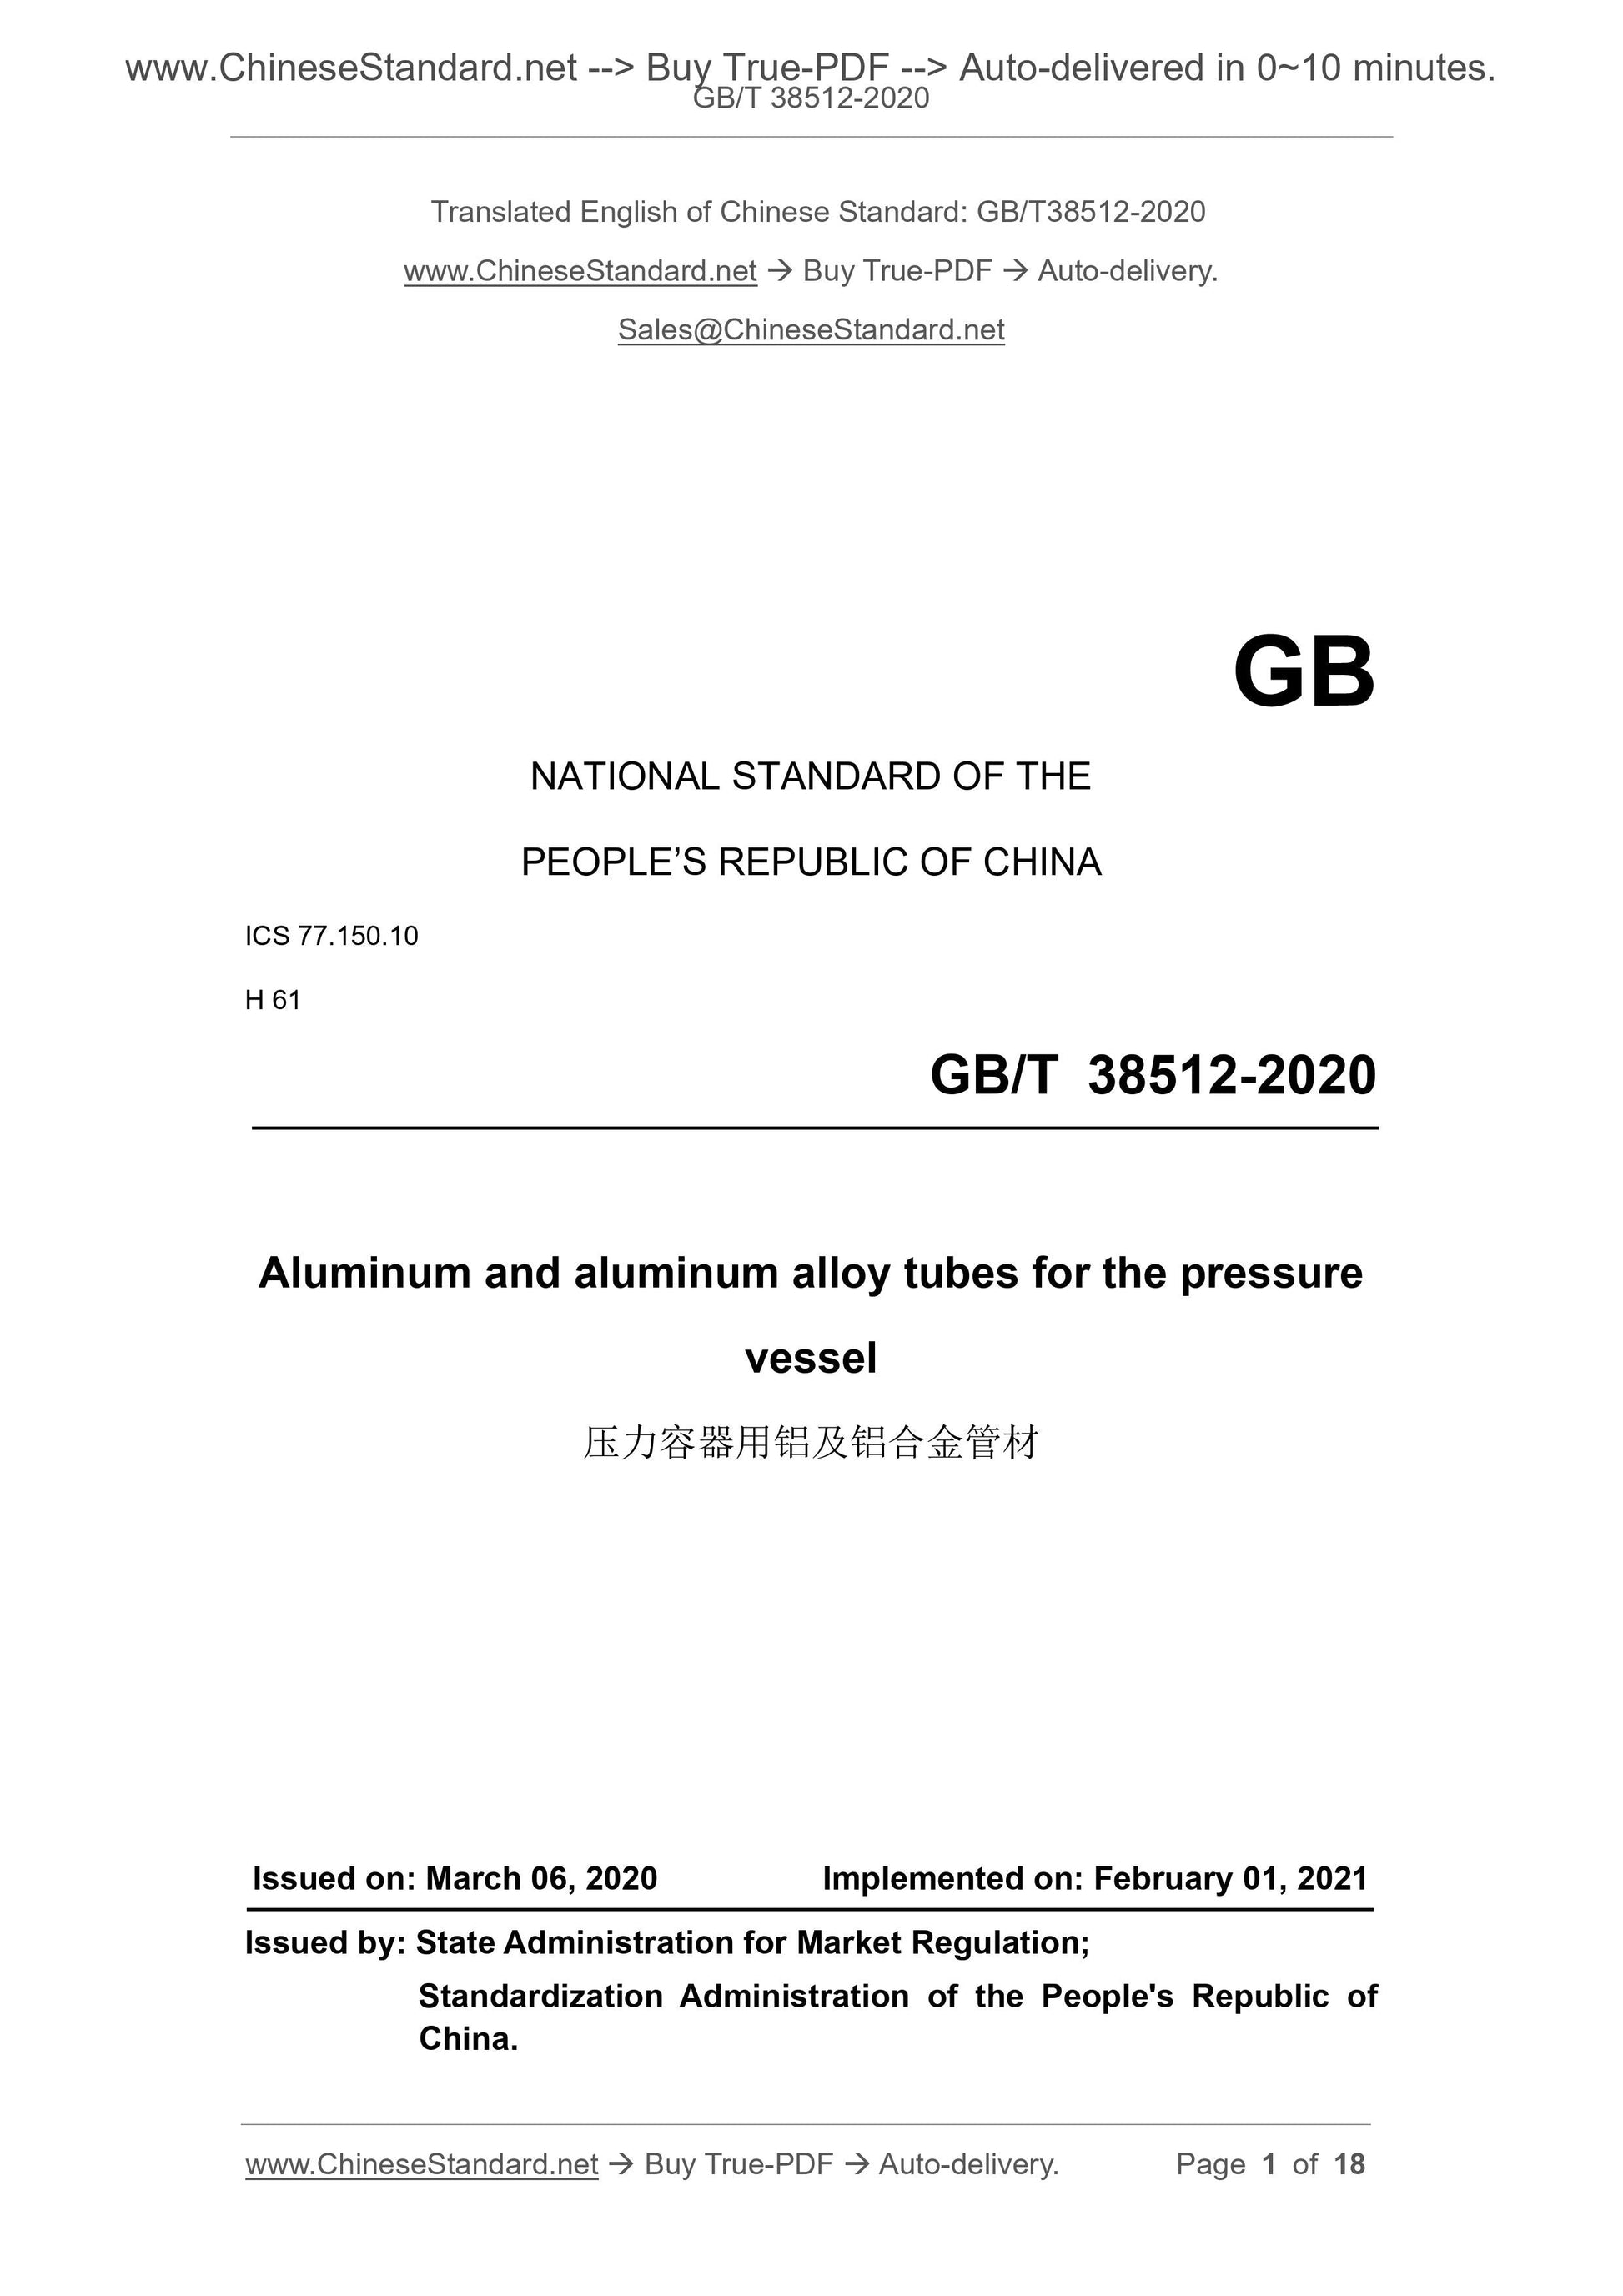 GB/T 38512-2020 Page 1